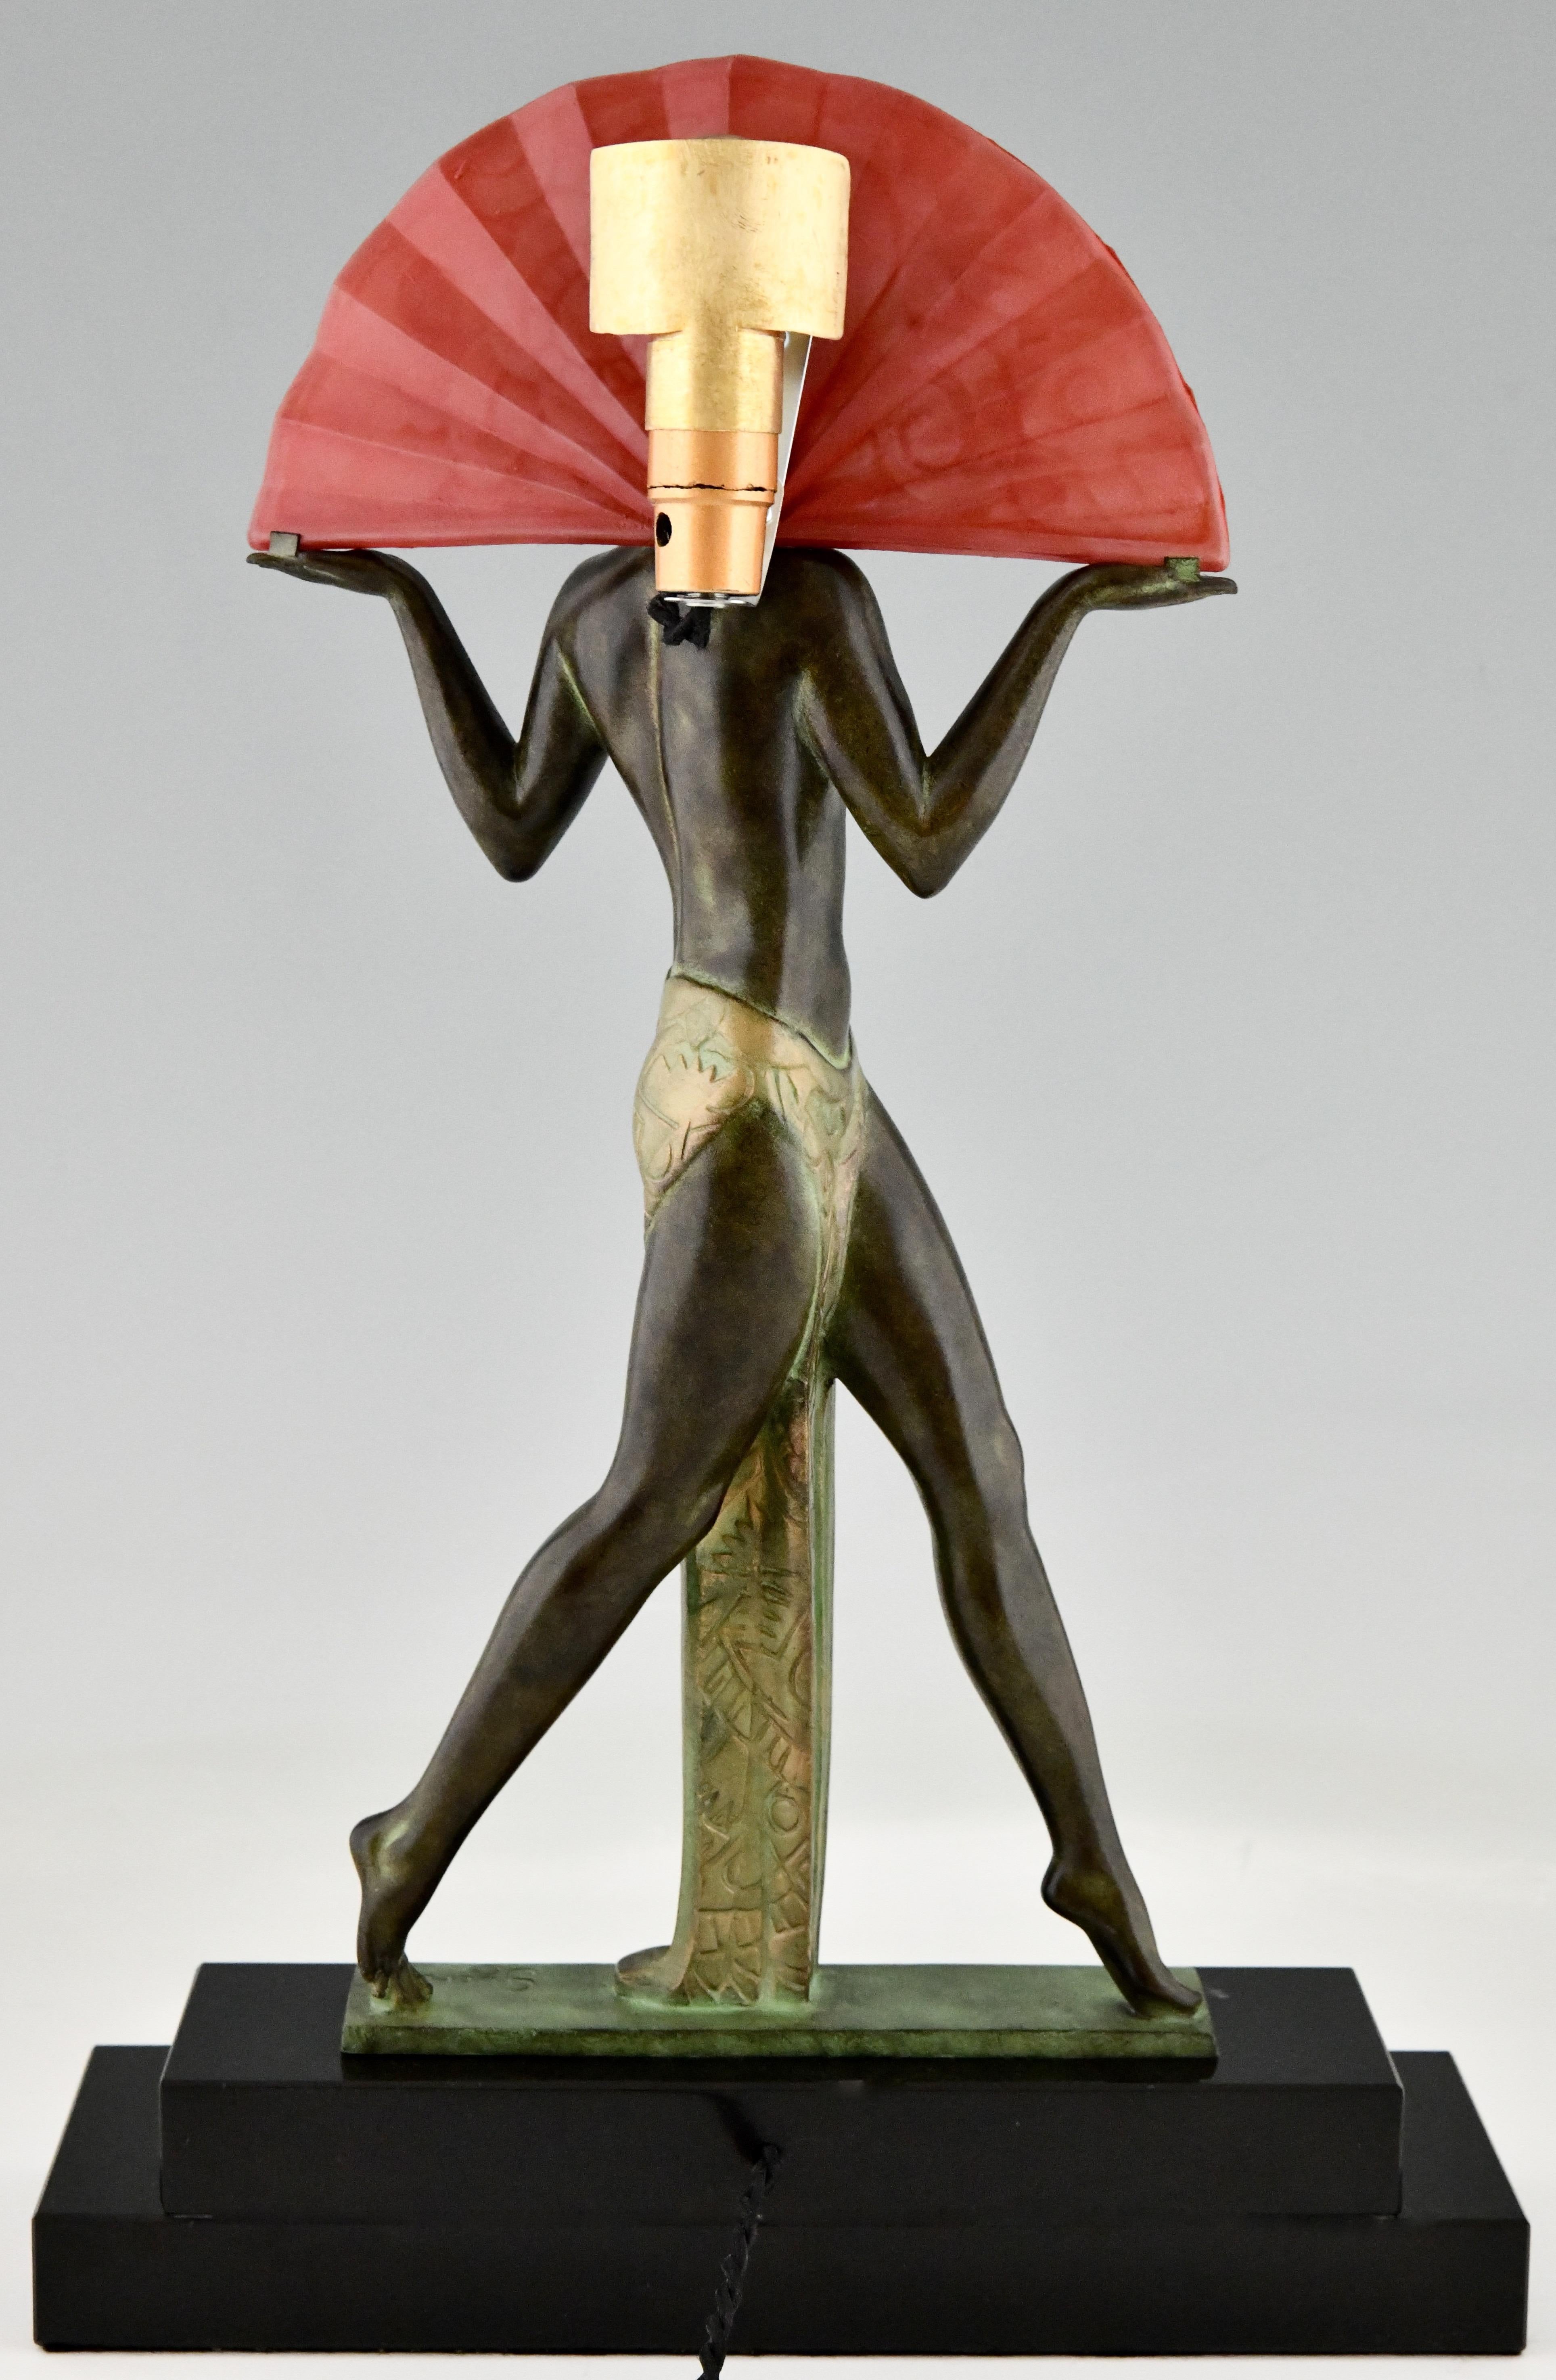 Contemporary Art Deco Style Lamp Espana Dancer with Fan by Guerbe for Max Le Verrier Original For Sale